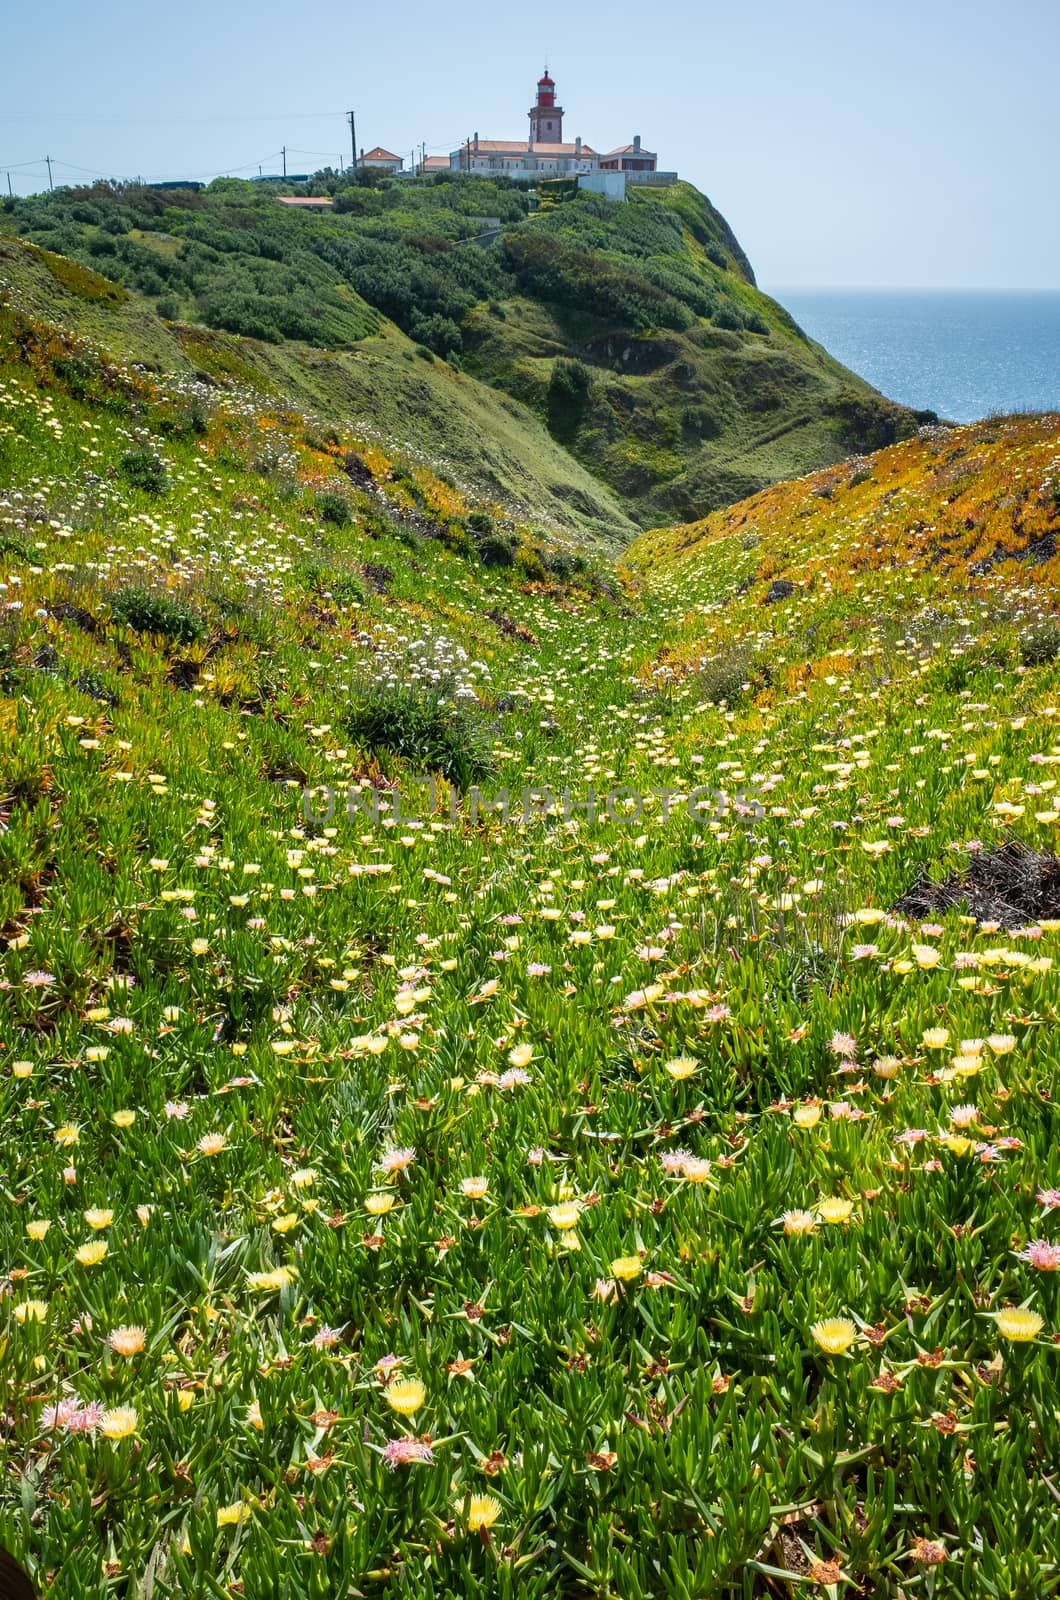 Lighthouse and wildflowers bloom at Cabo da Roda, Sintra, Portugal